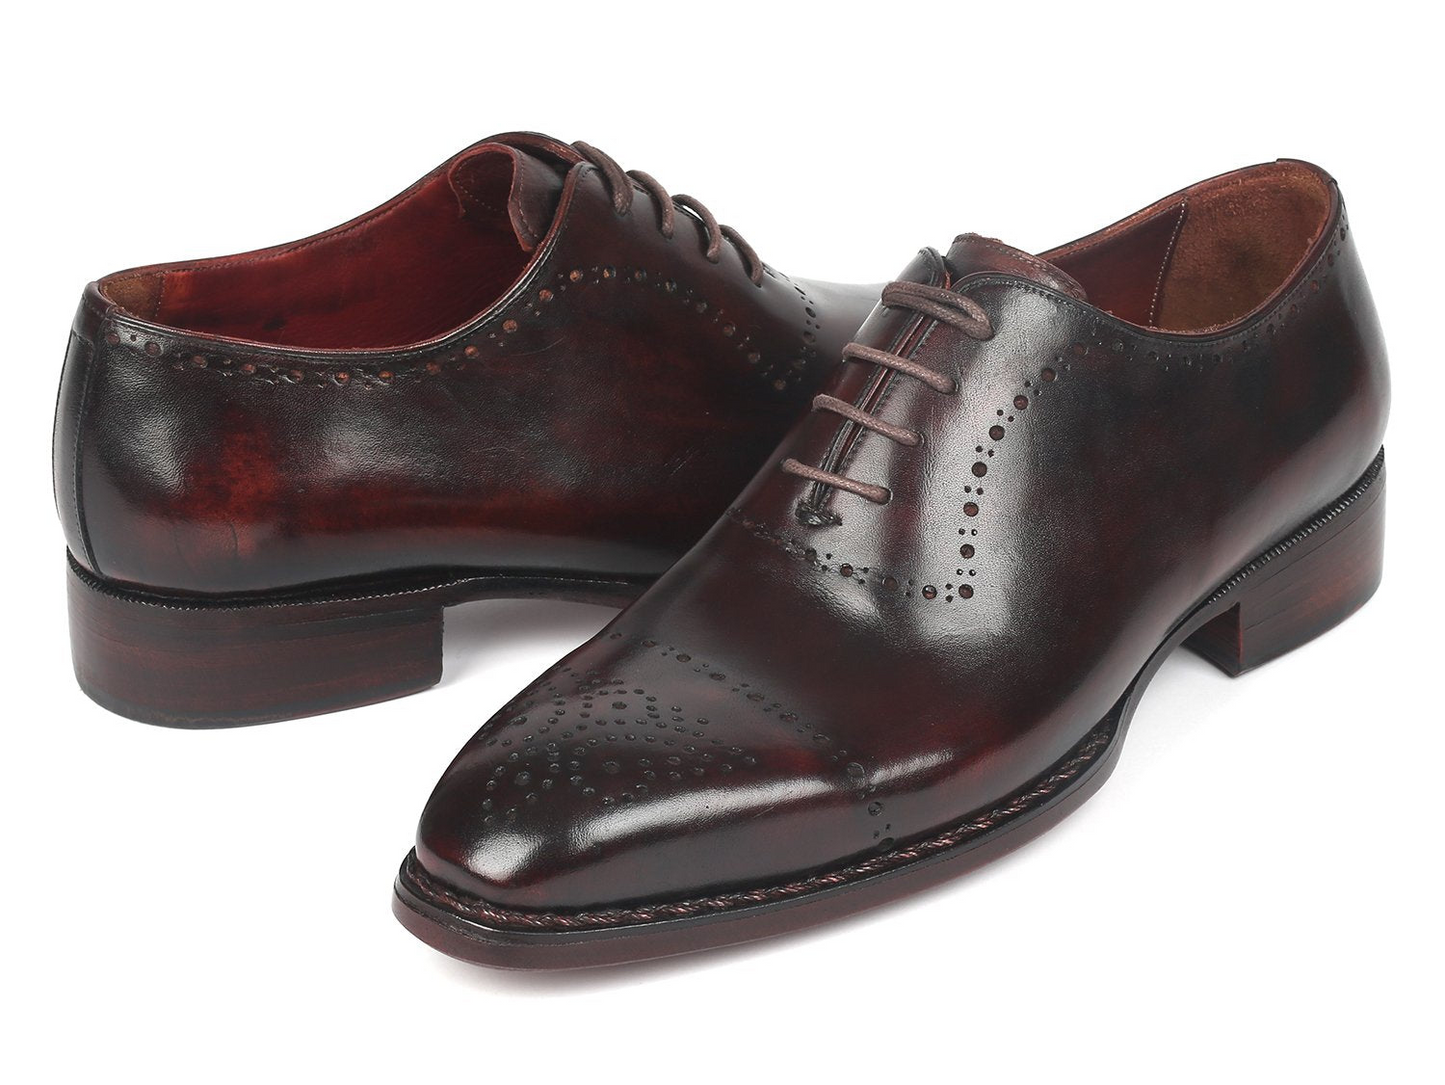 Dark Bordeaux Goodyear Welted Oxfords, Handmade to order.